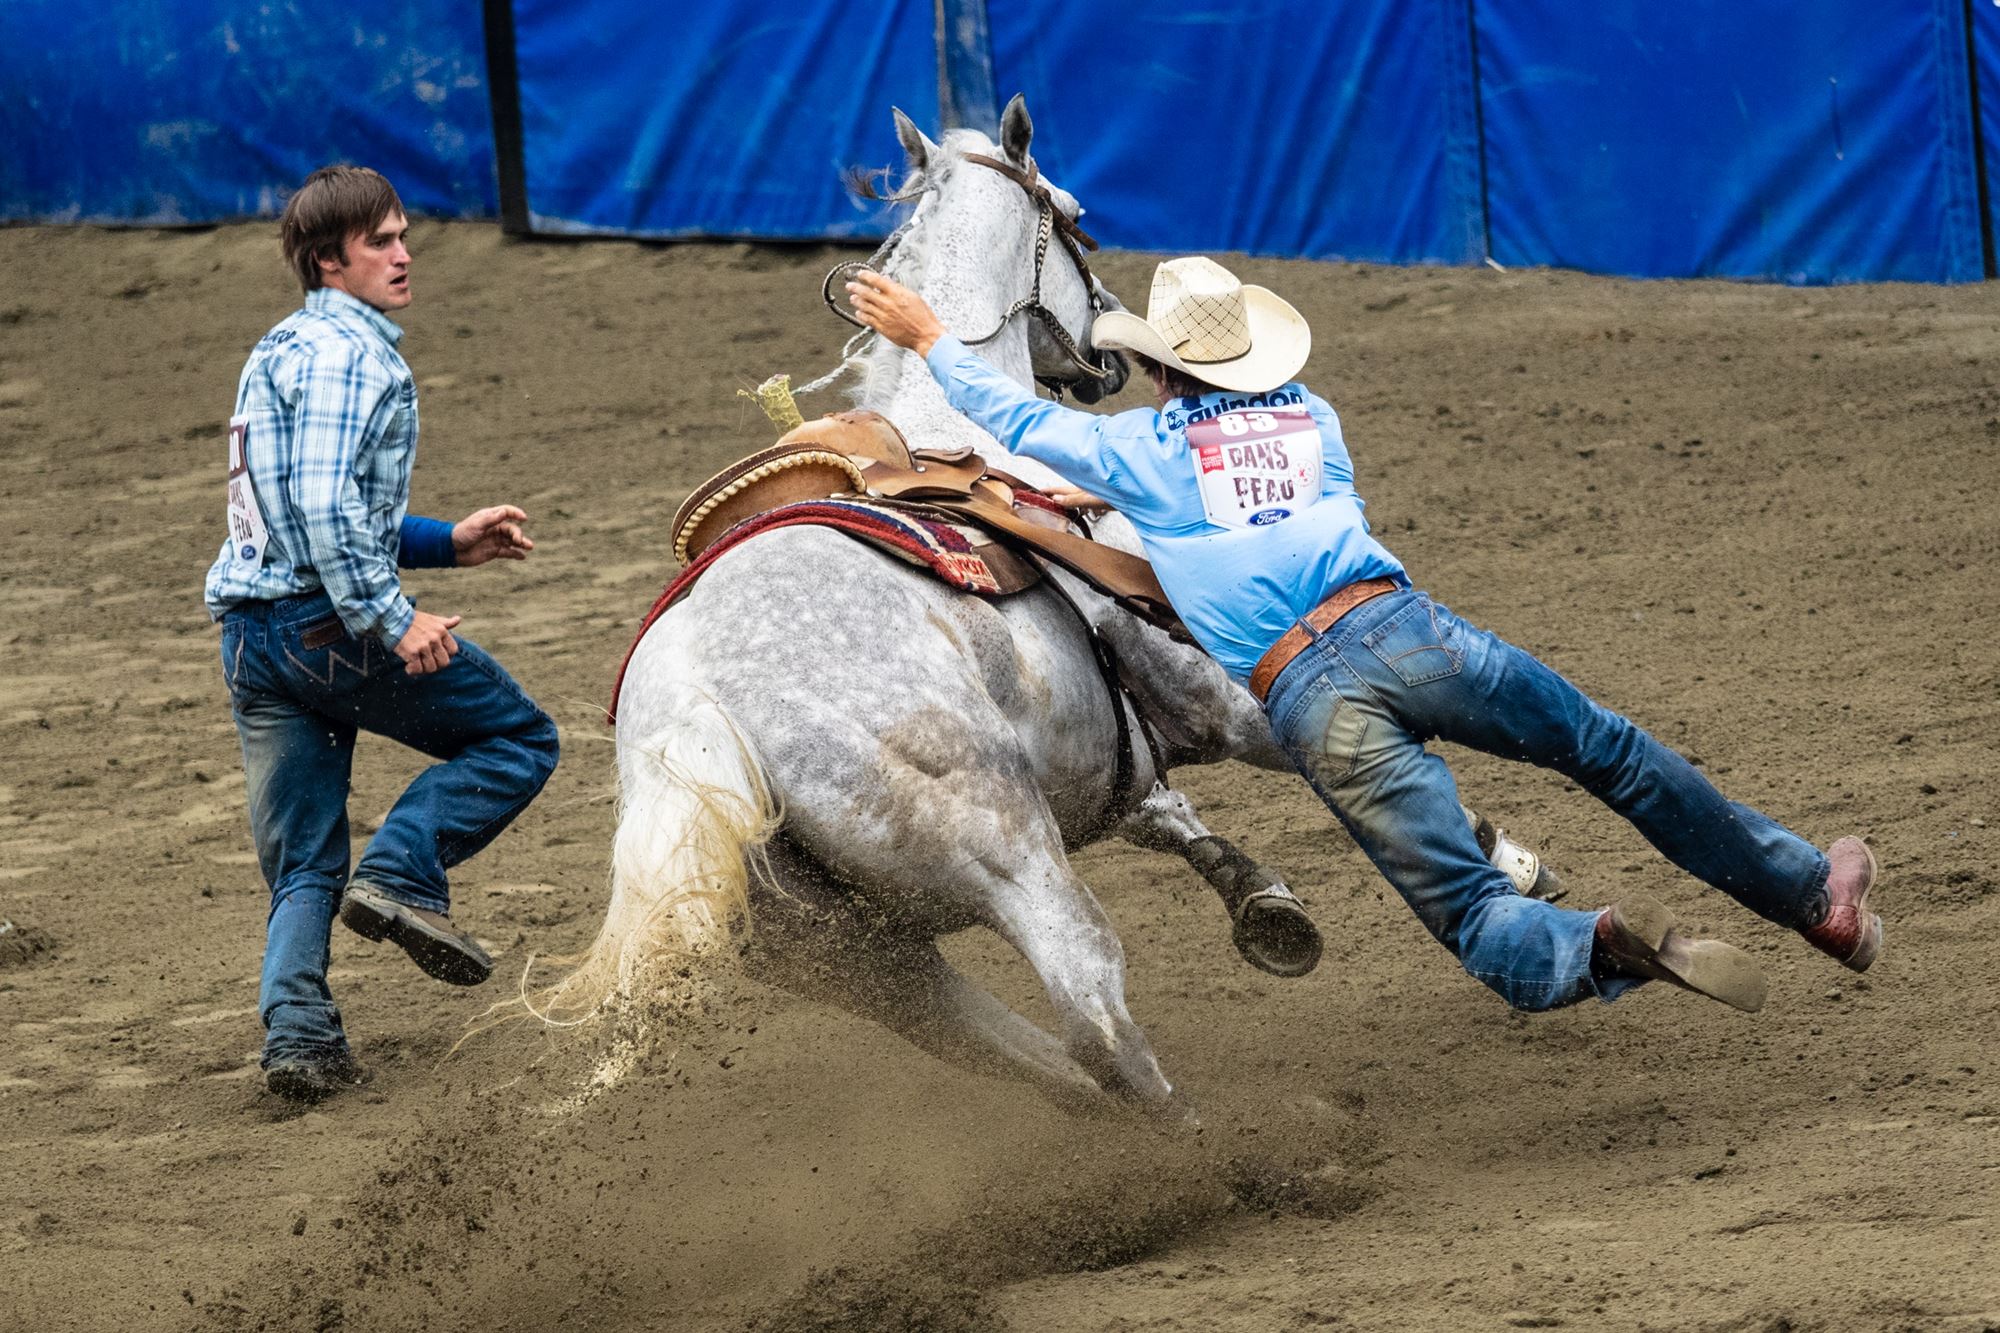 10 Fun Facts About the Texas Rodeo